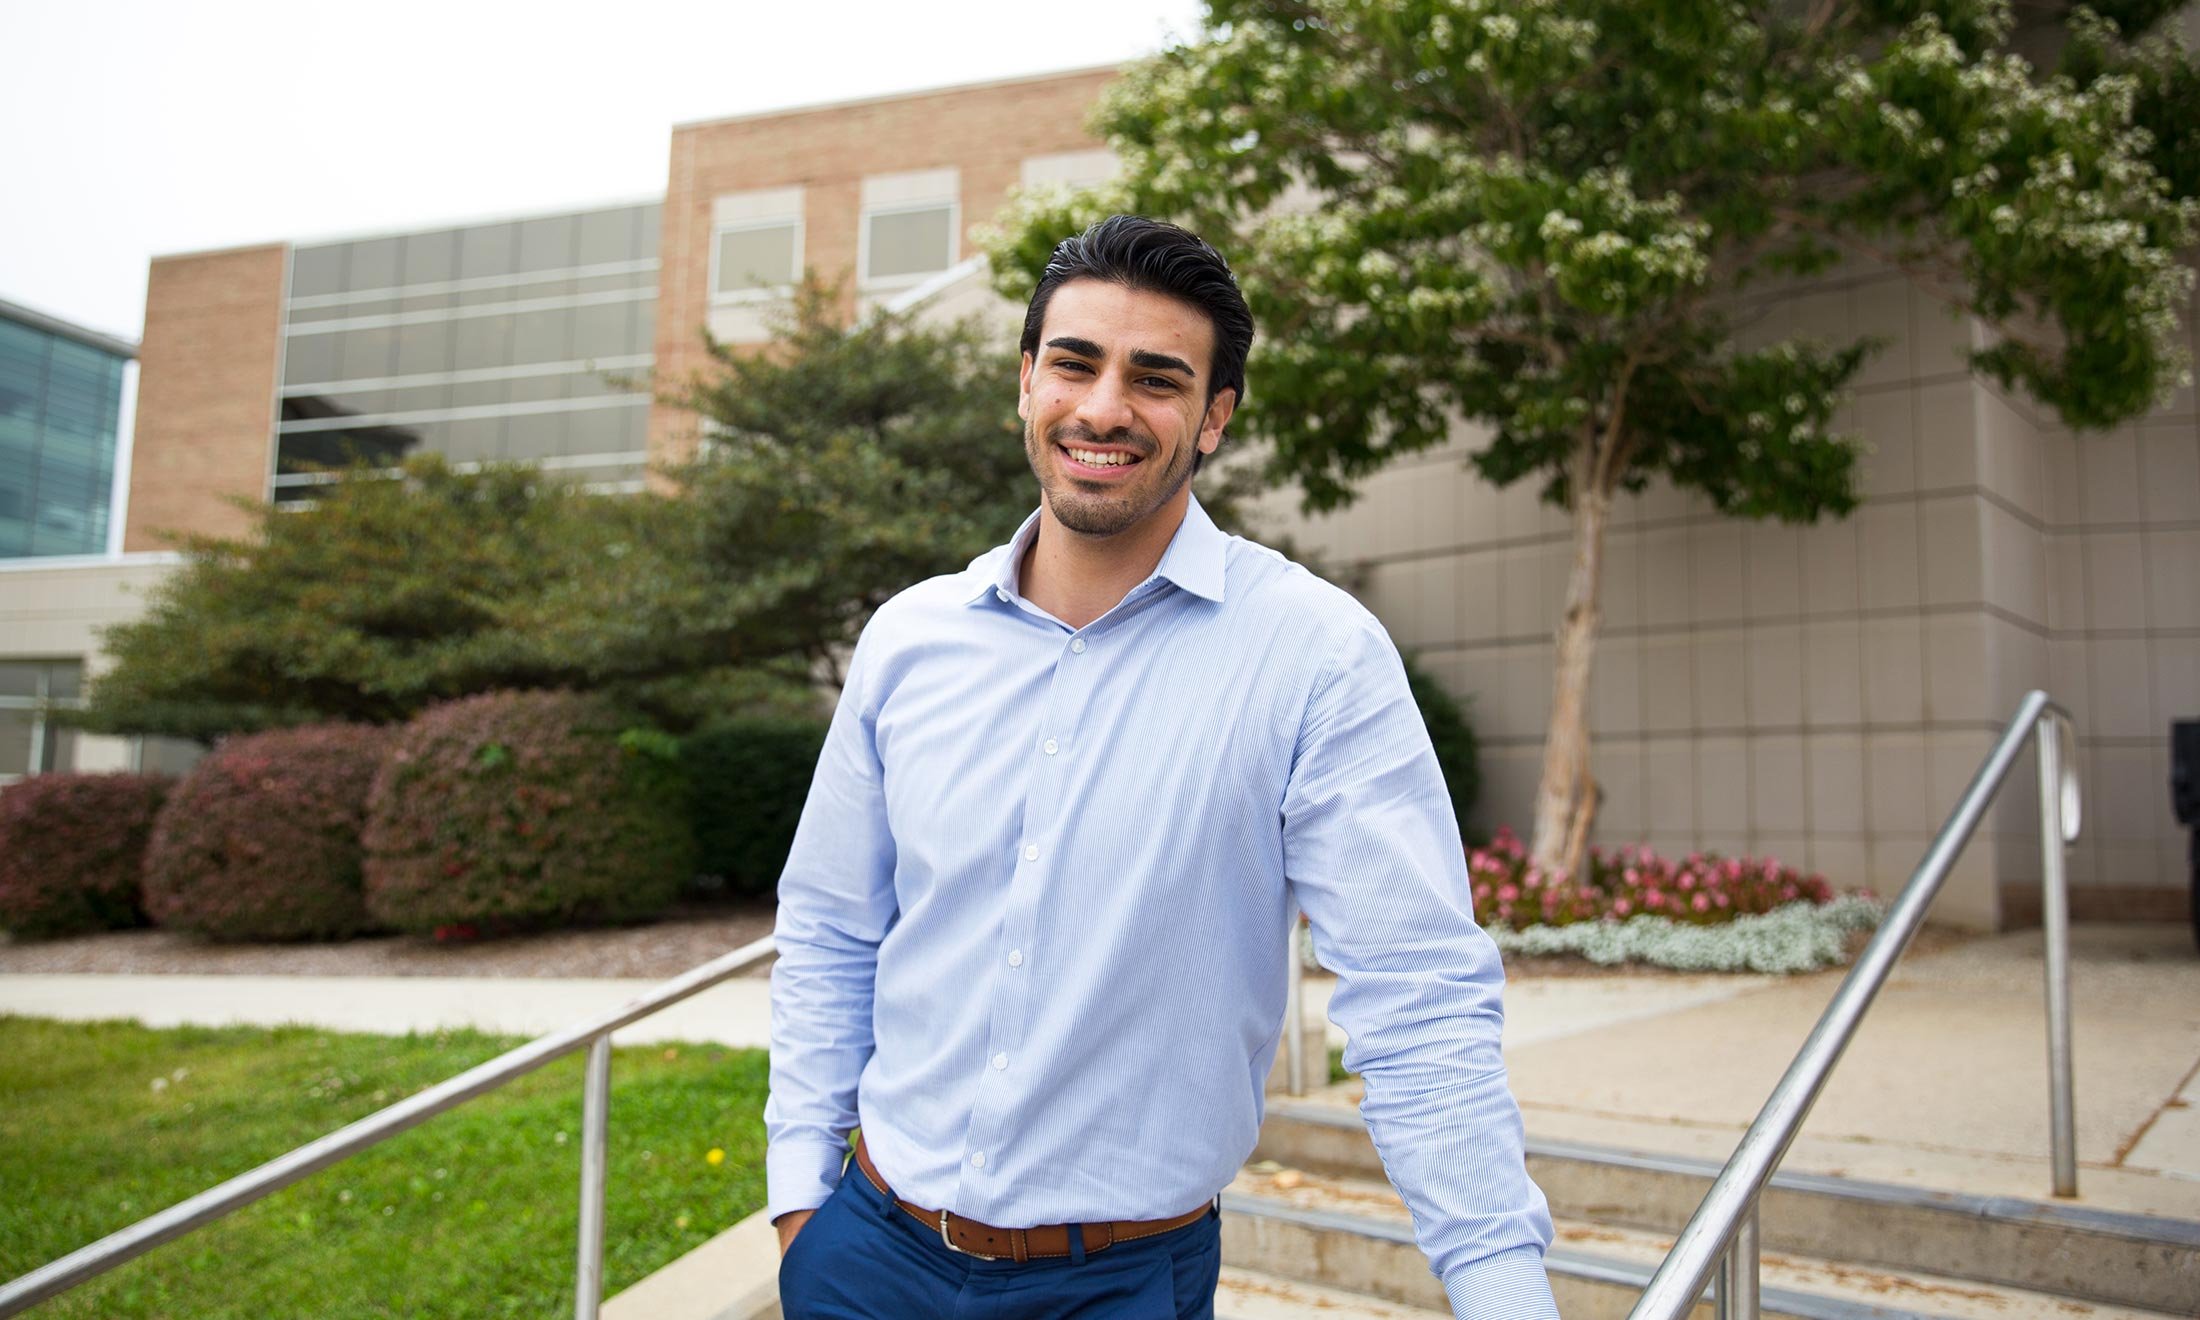 Oakland University Student Congress Vice President Jousef Shkoukani stands on the steps outside of the School of Business Administration building on campus